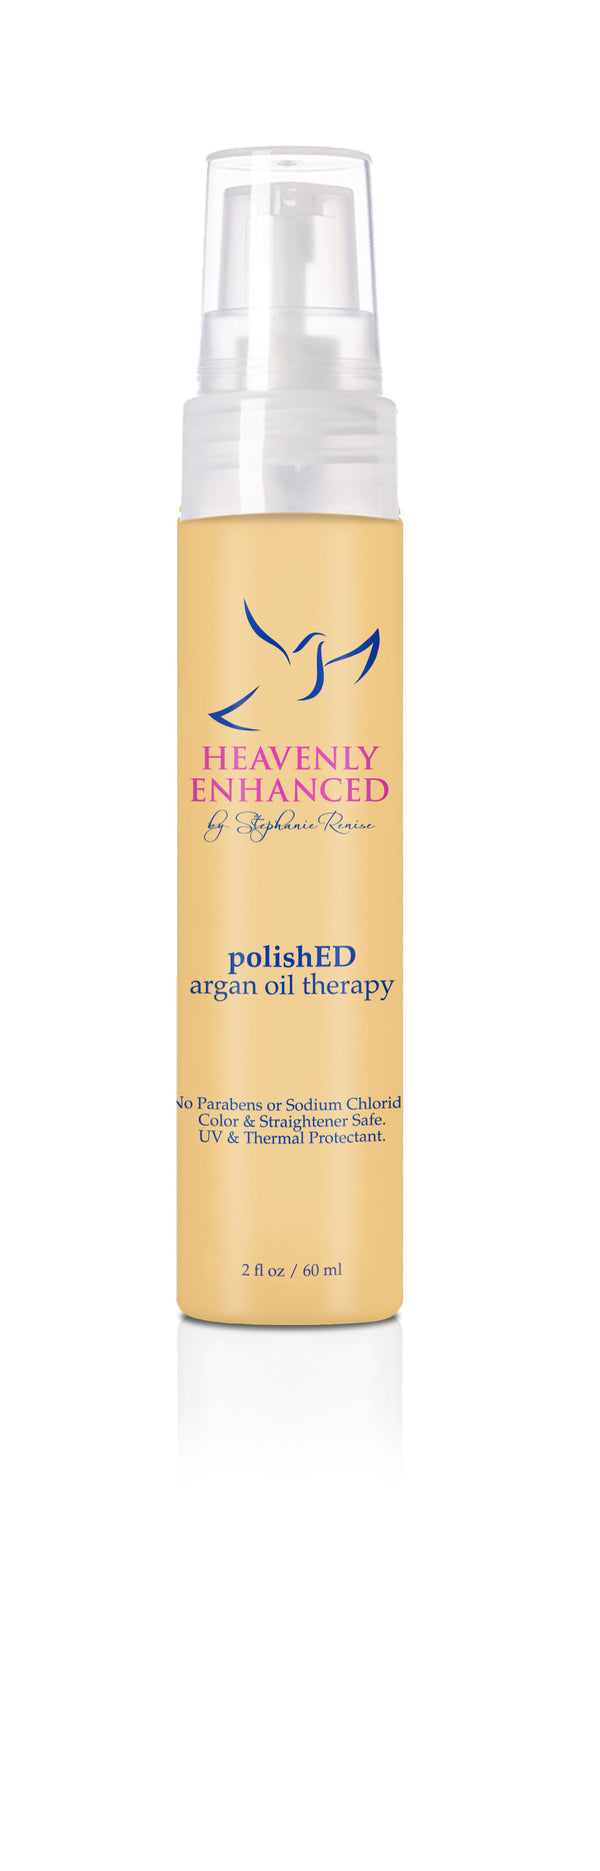 polishED - argan oil therapy